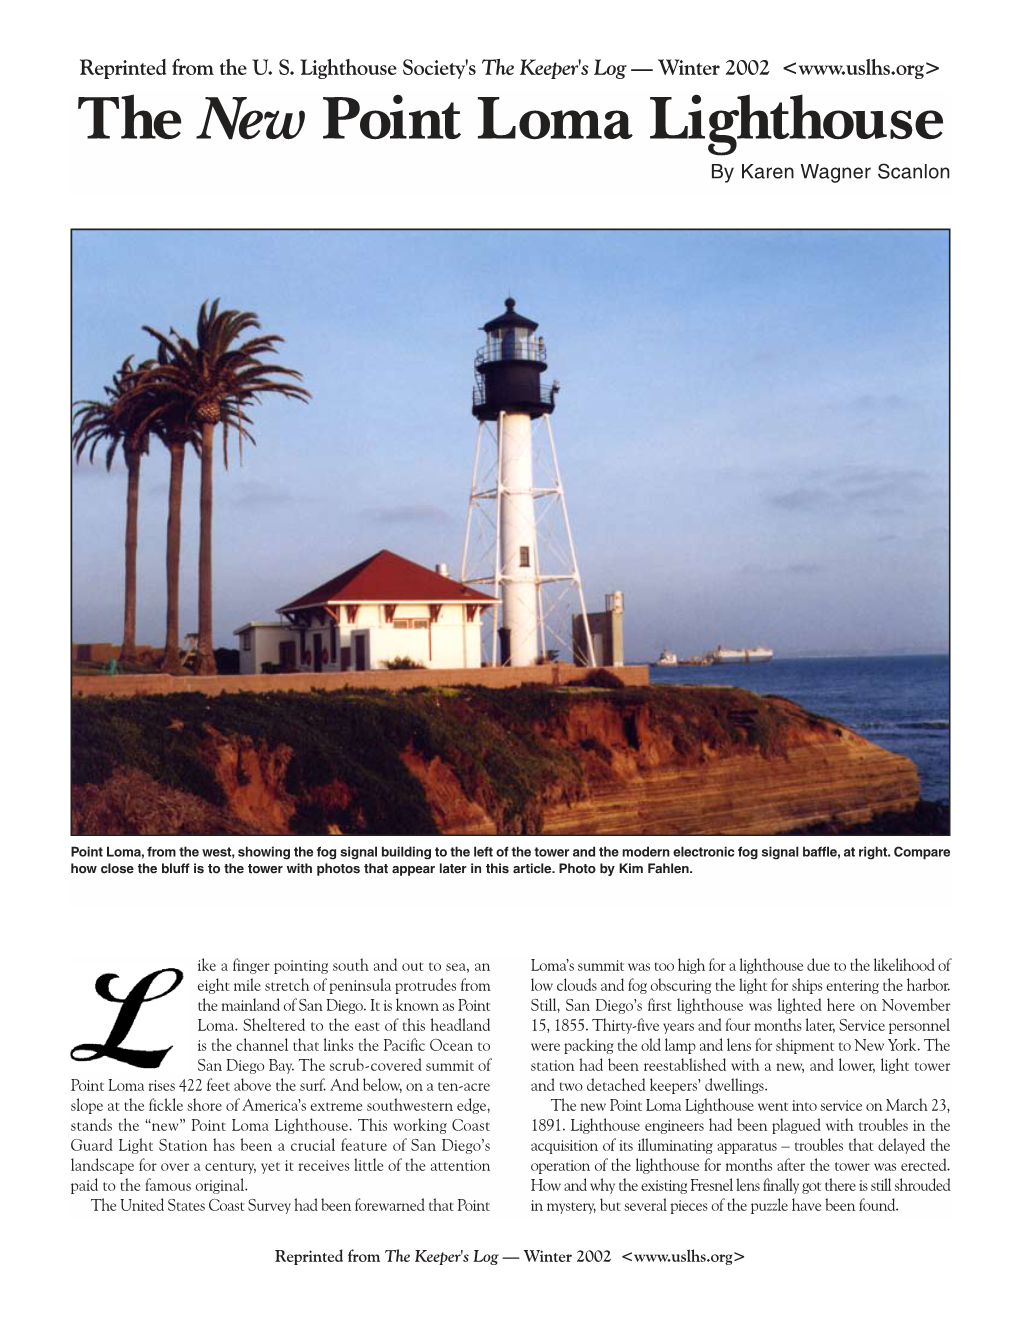 The New Point Loma Lighthouse by Karen Wagner Scanlon